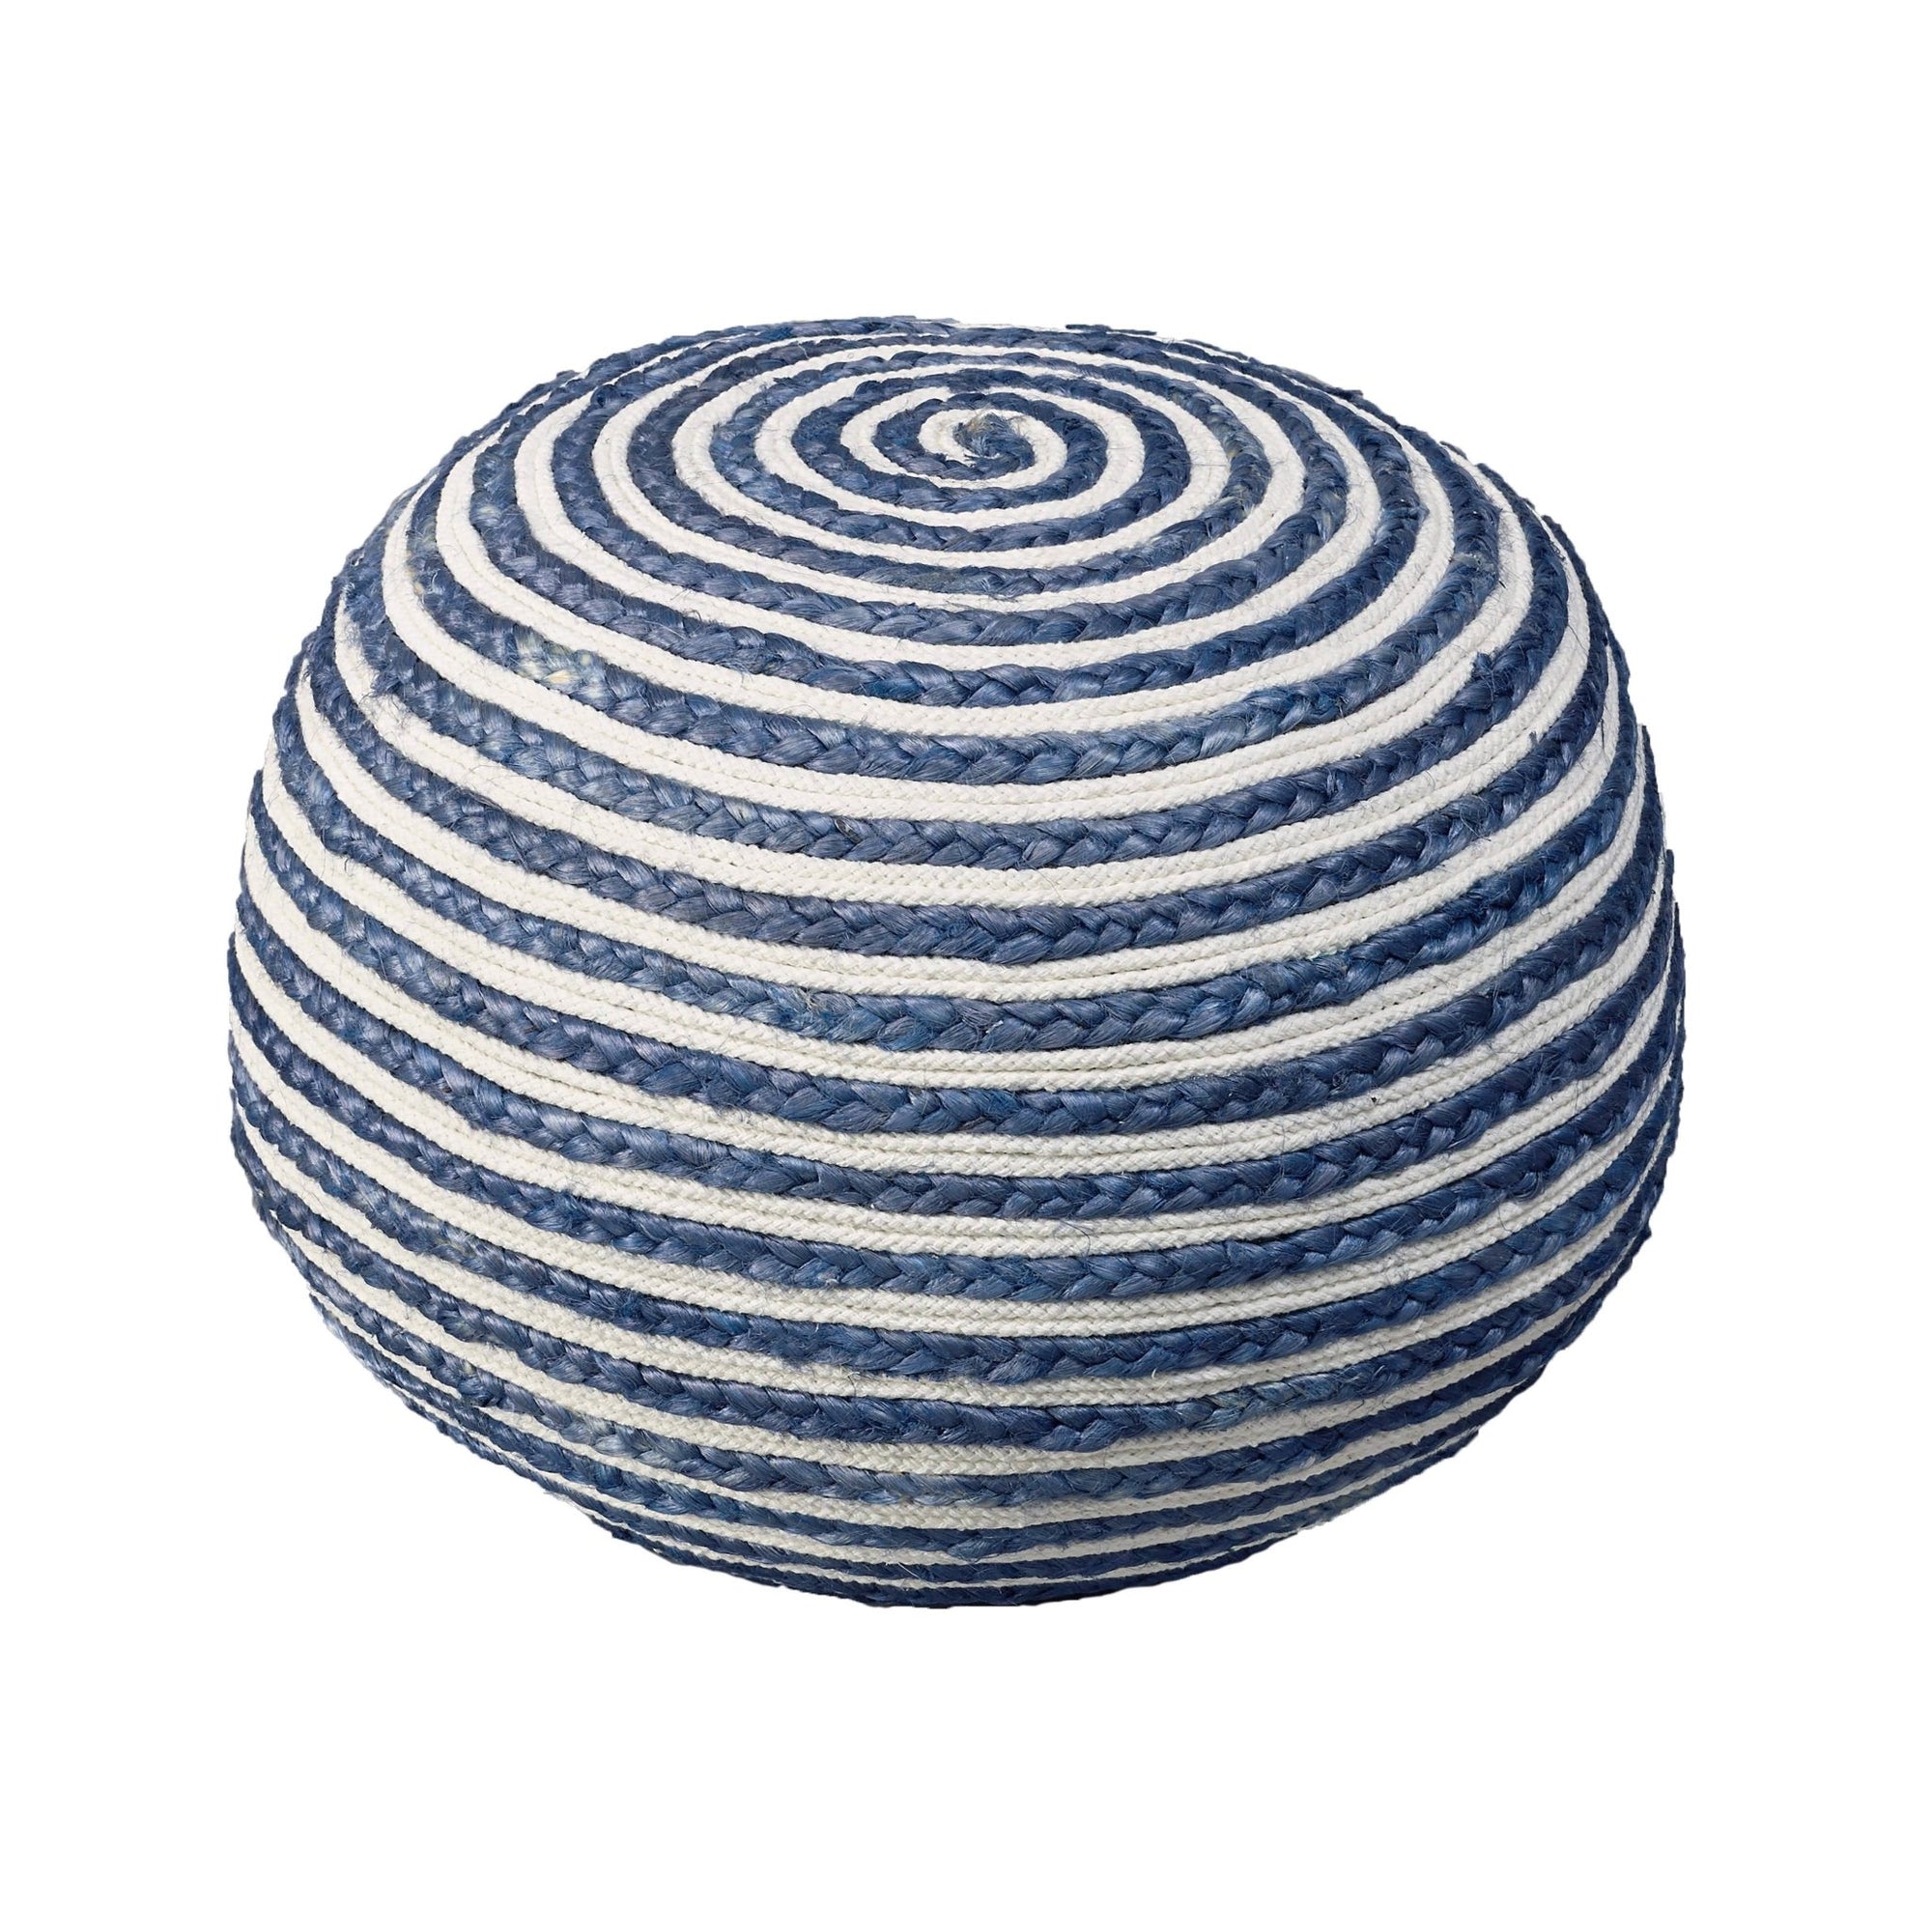 Seafaring Navy LR99701 Pouf - Rug & Home